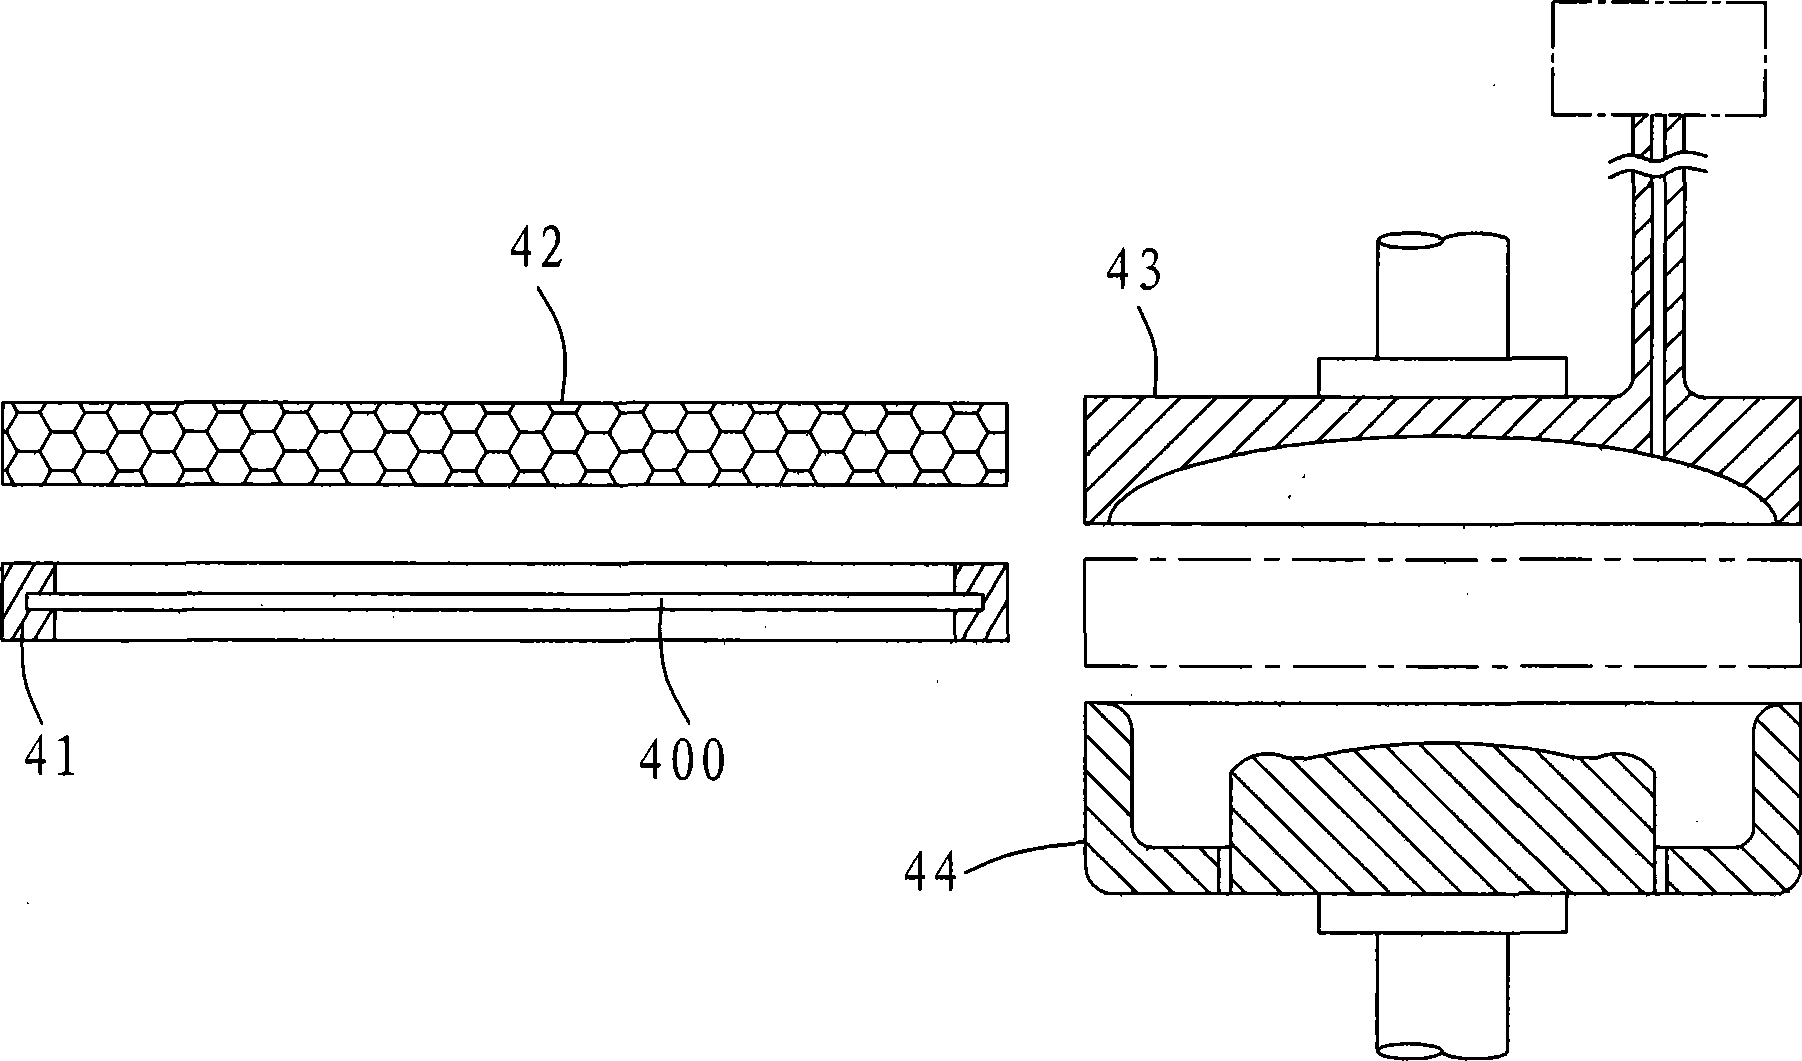 Film forming equipment and method